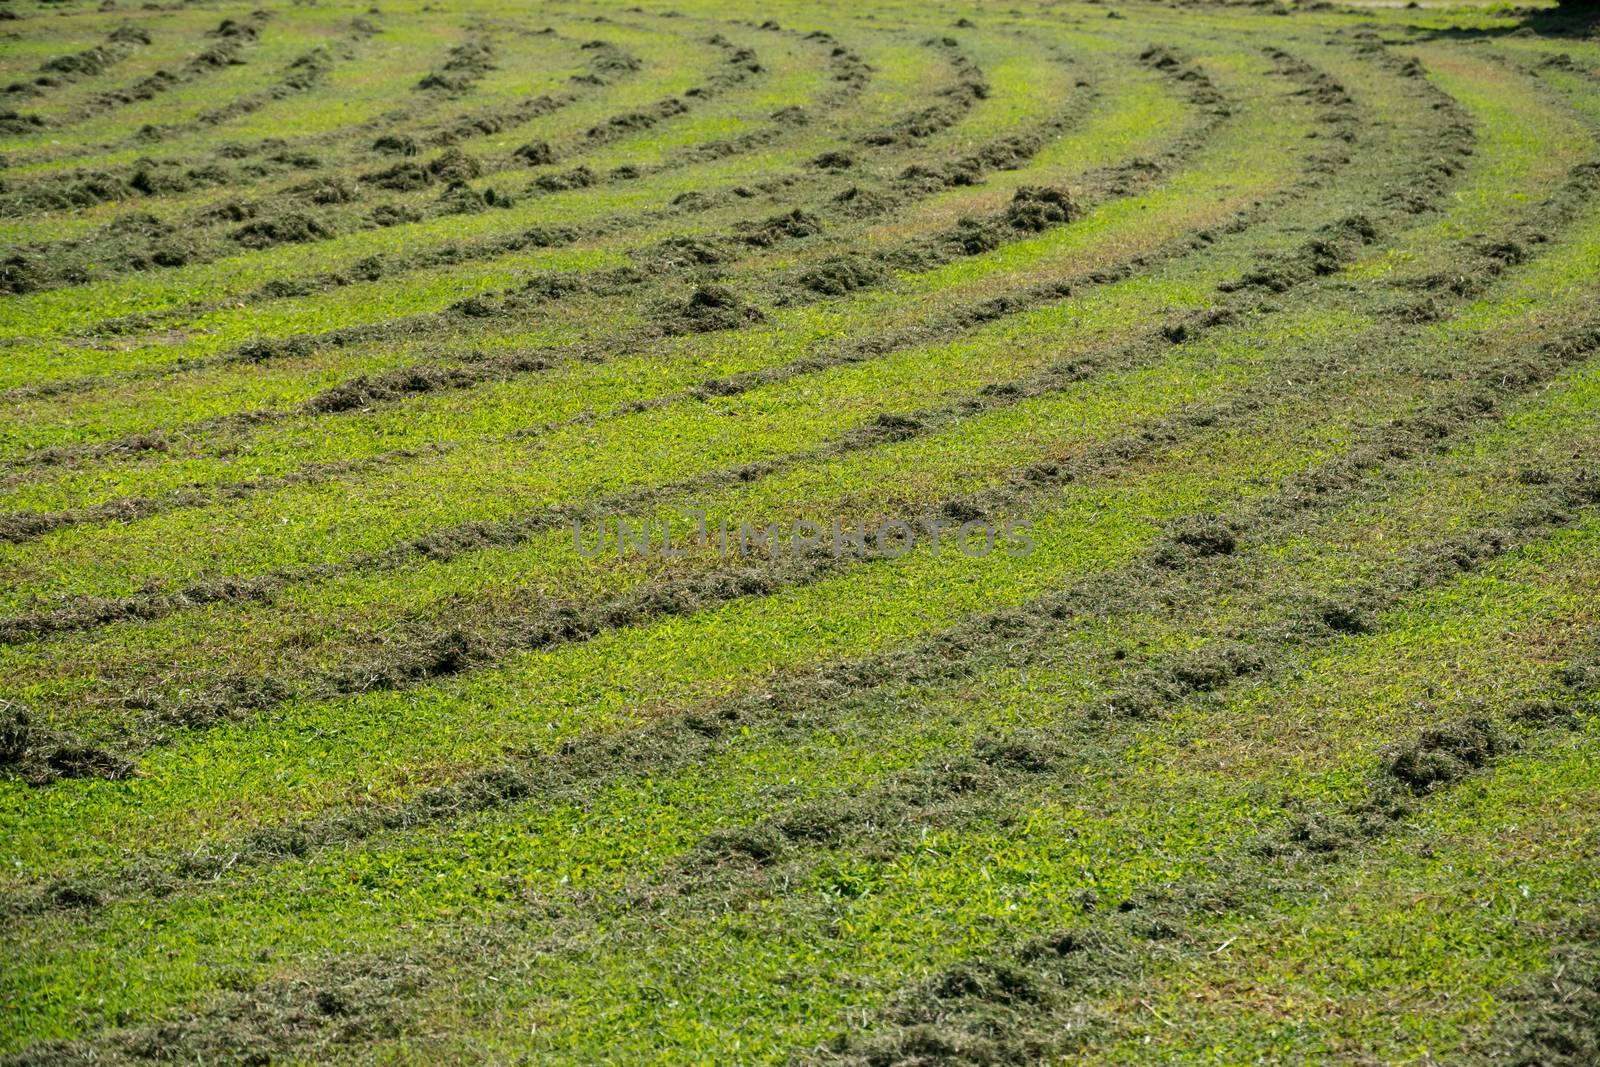 Grass in the yard cut by a lawn mower